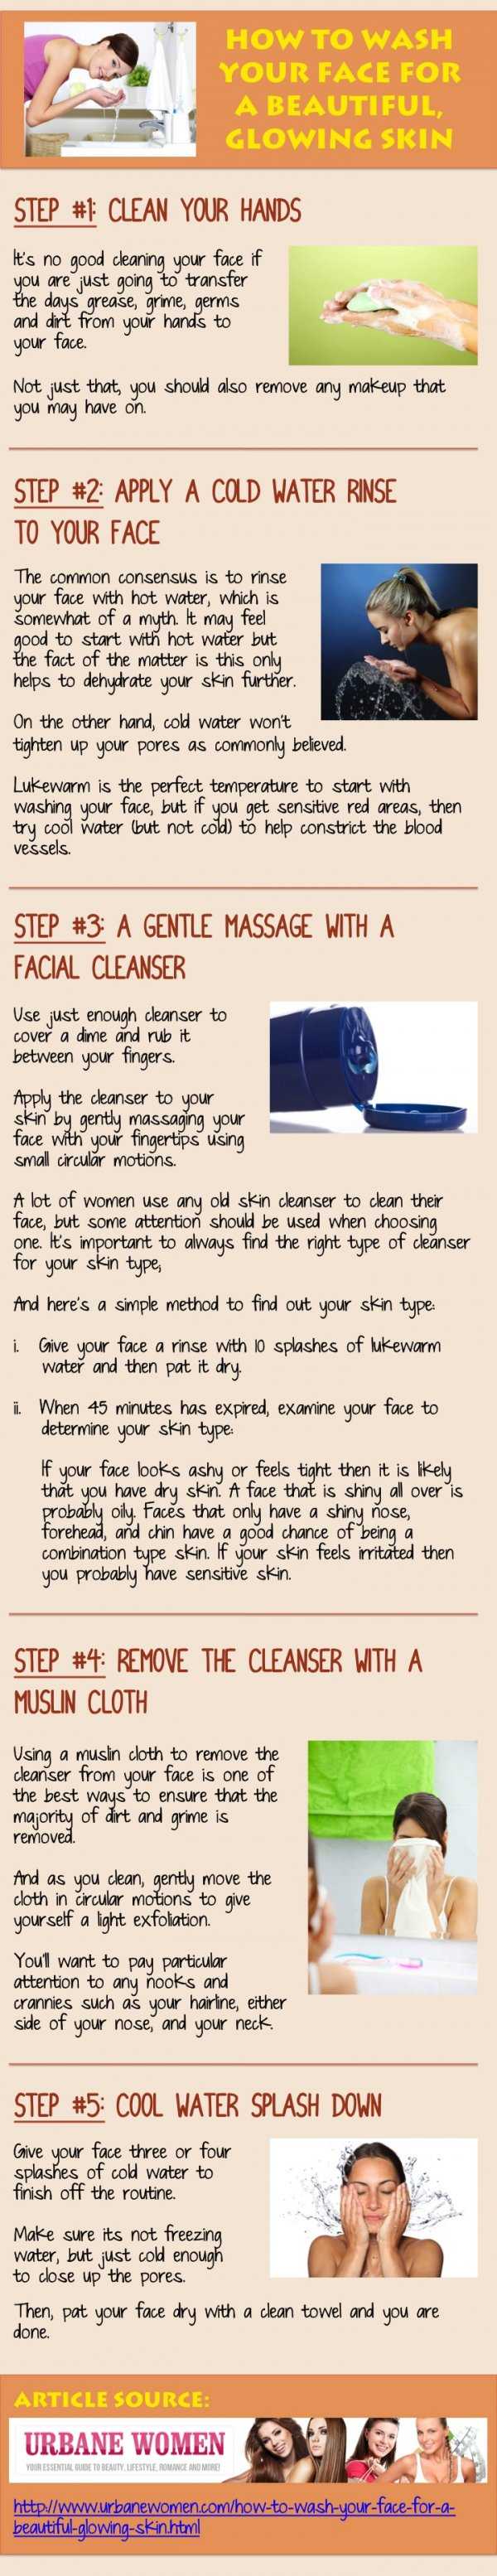 How To Wash Your Face